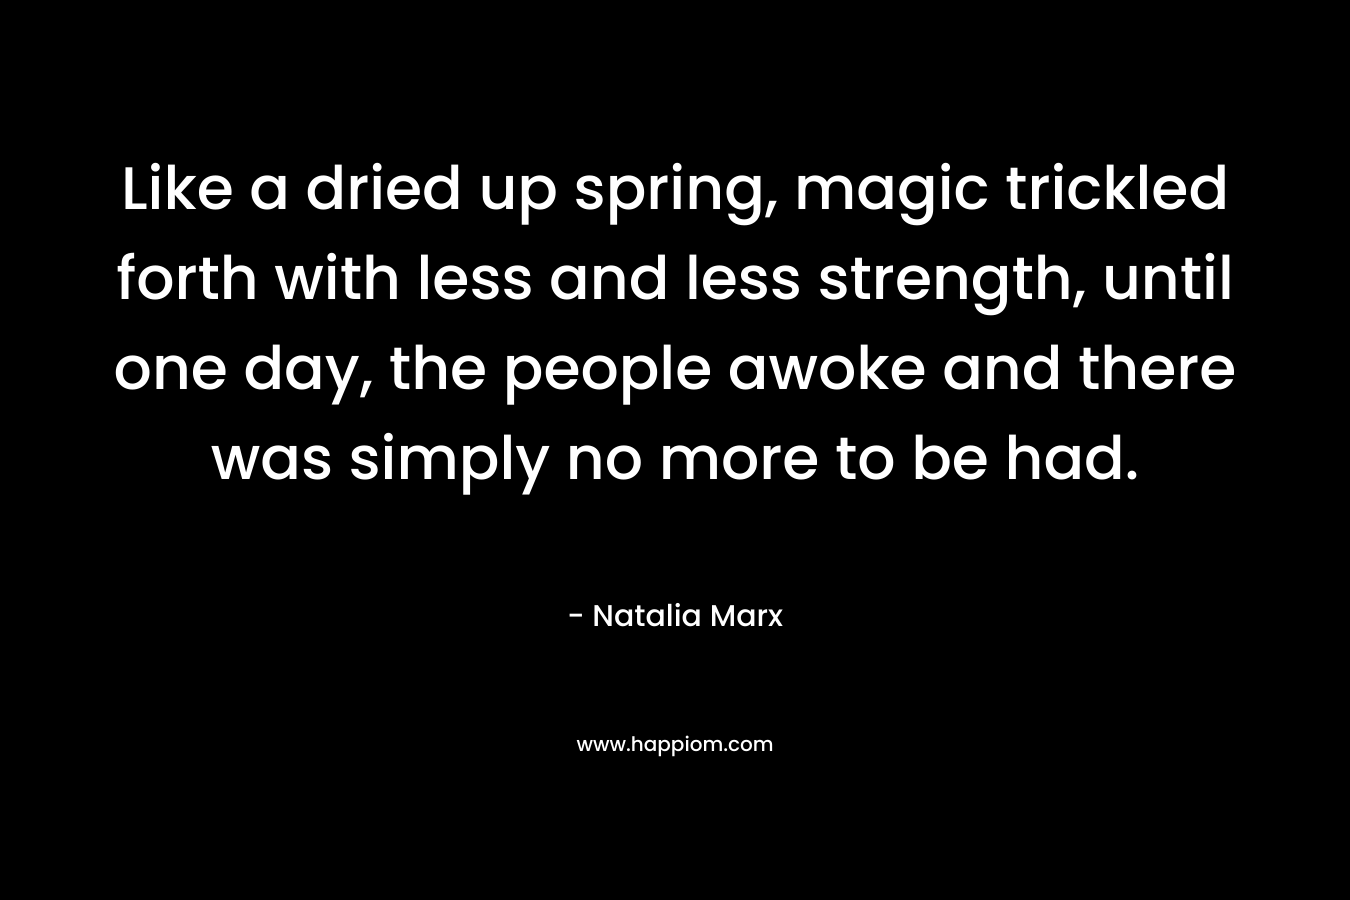 Like a dried up spring, magic trickled forth with less and less strength, until one day, the people awoke and there was simply no more to be had. – Natalia Marx